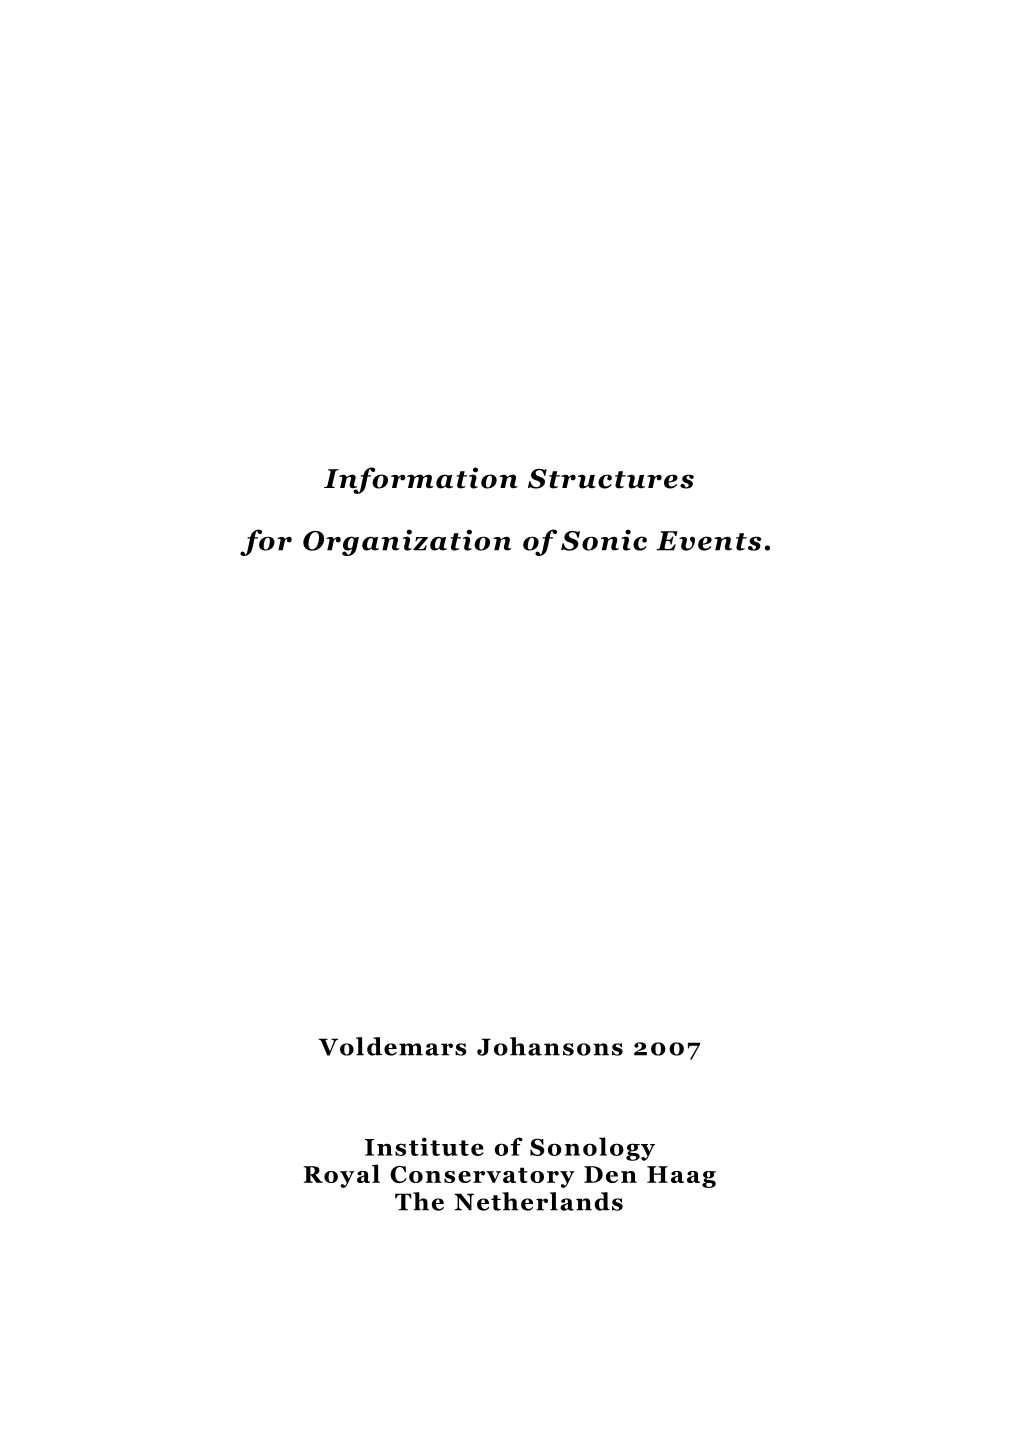 Information Structures for Organization of Sonic Events